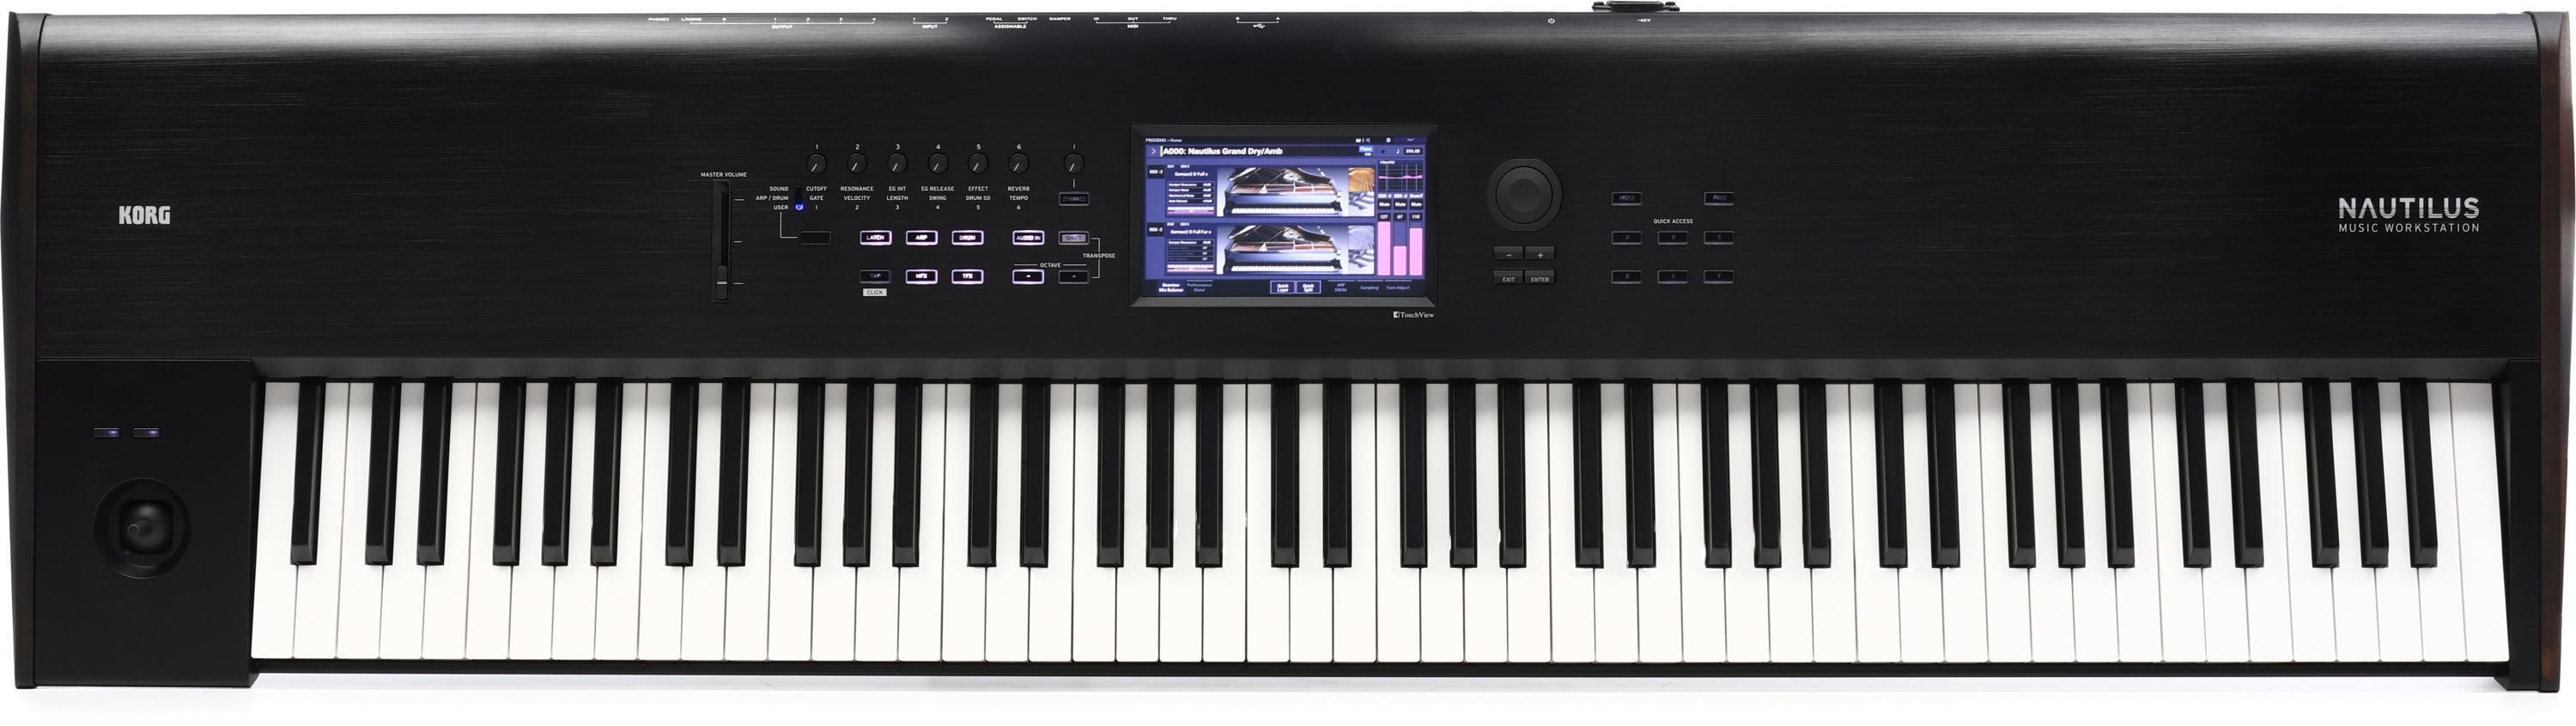 Enjoy The Tunes With A Wholesale roll up piano keyboards 